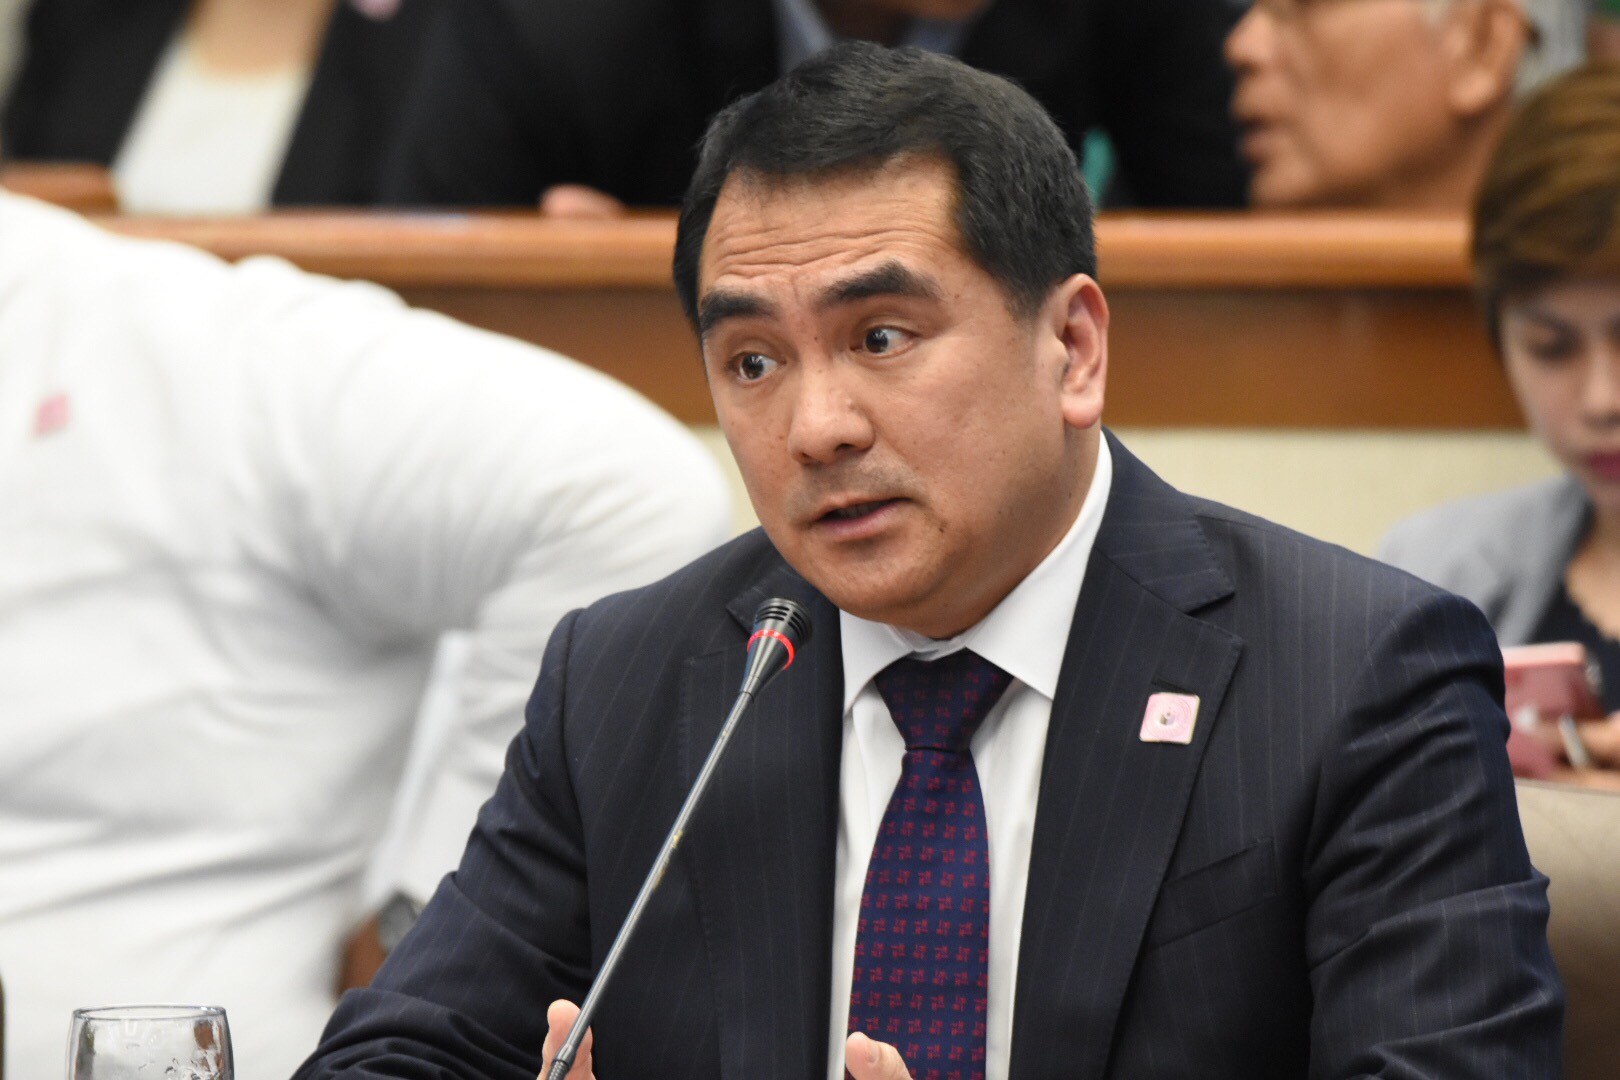 Nilo Divina, dean of UST Faculty of Civil Law September 25, during the Senate public order hearing on the death of Horacio Castillo III. Photo by Angie de Silva/Rappler  